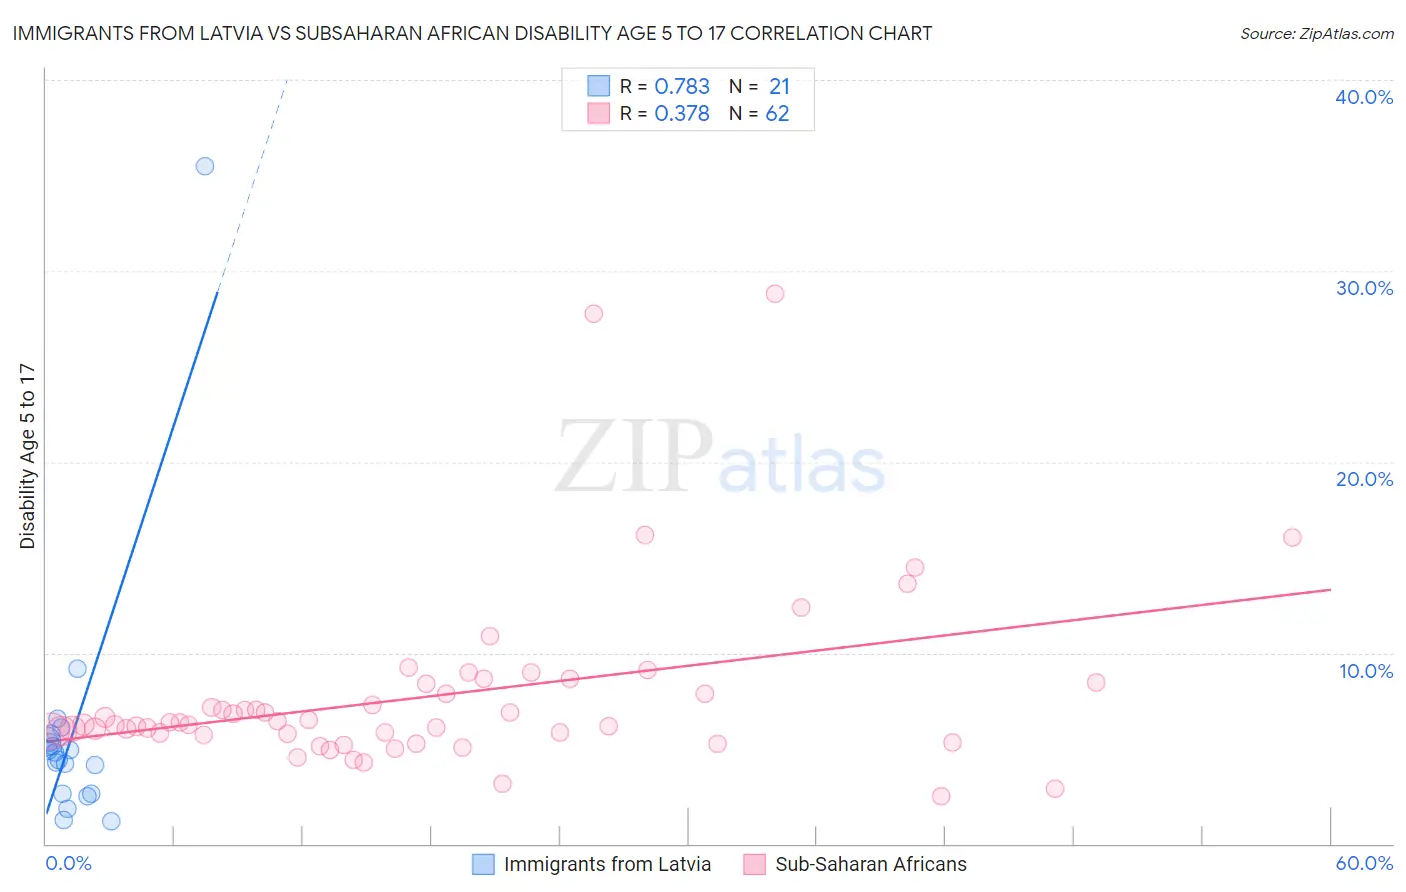 Immigrants from Latvia vs Subsaharan African Disability Age 5 to 17